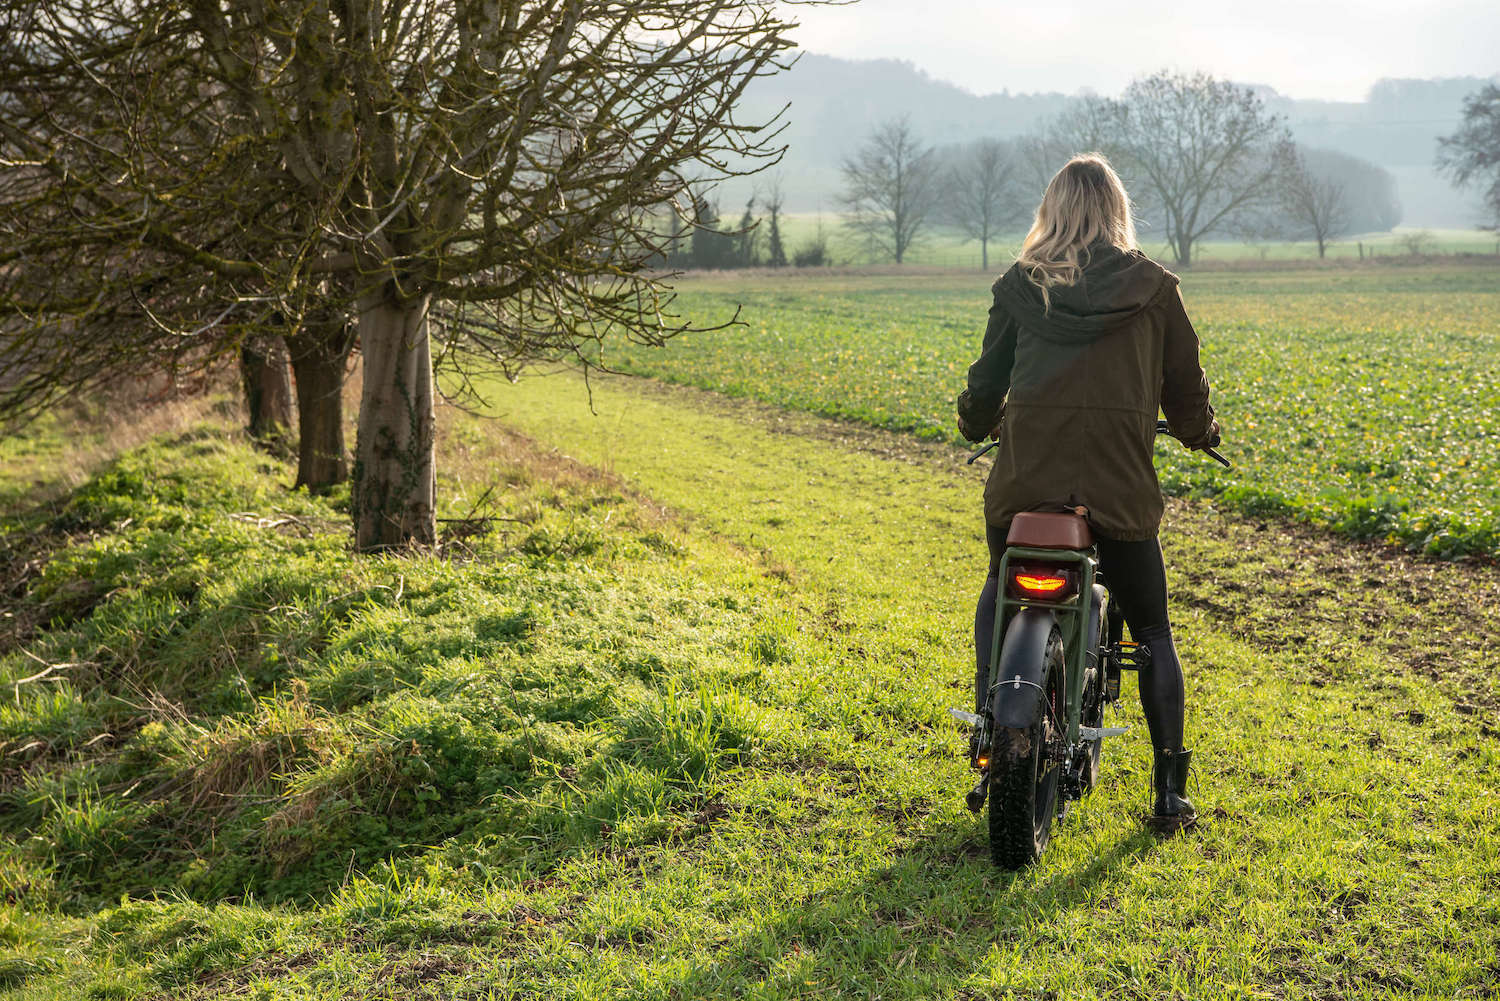 The Cruiser electric bicycle in the countryside